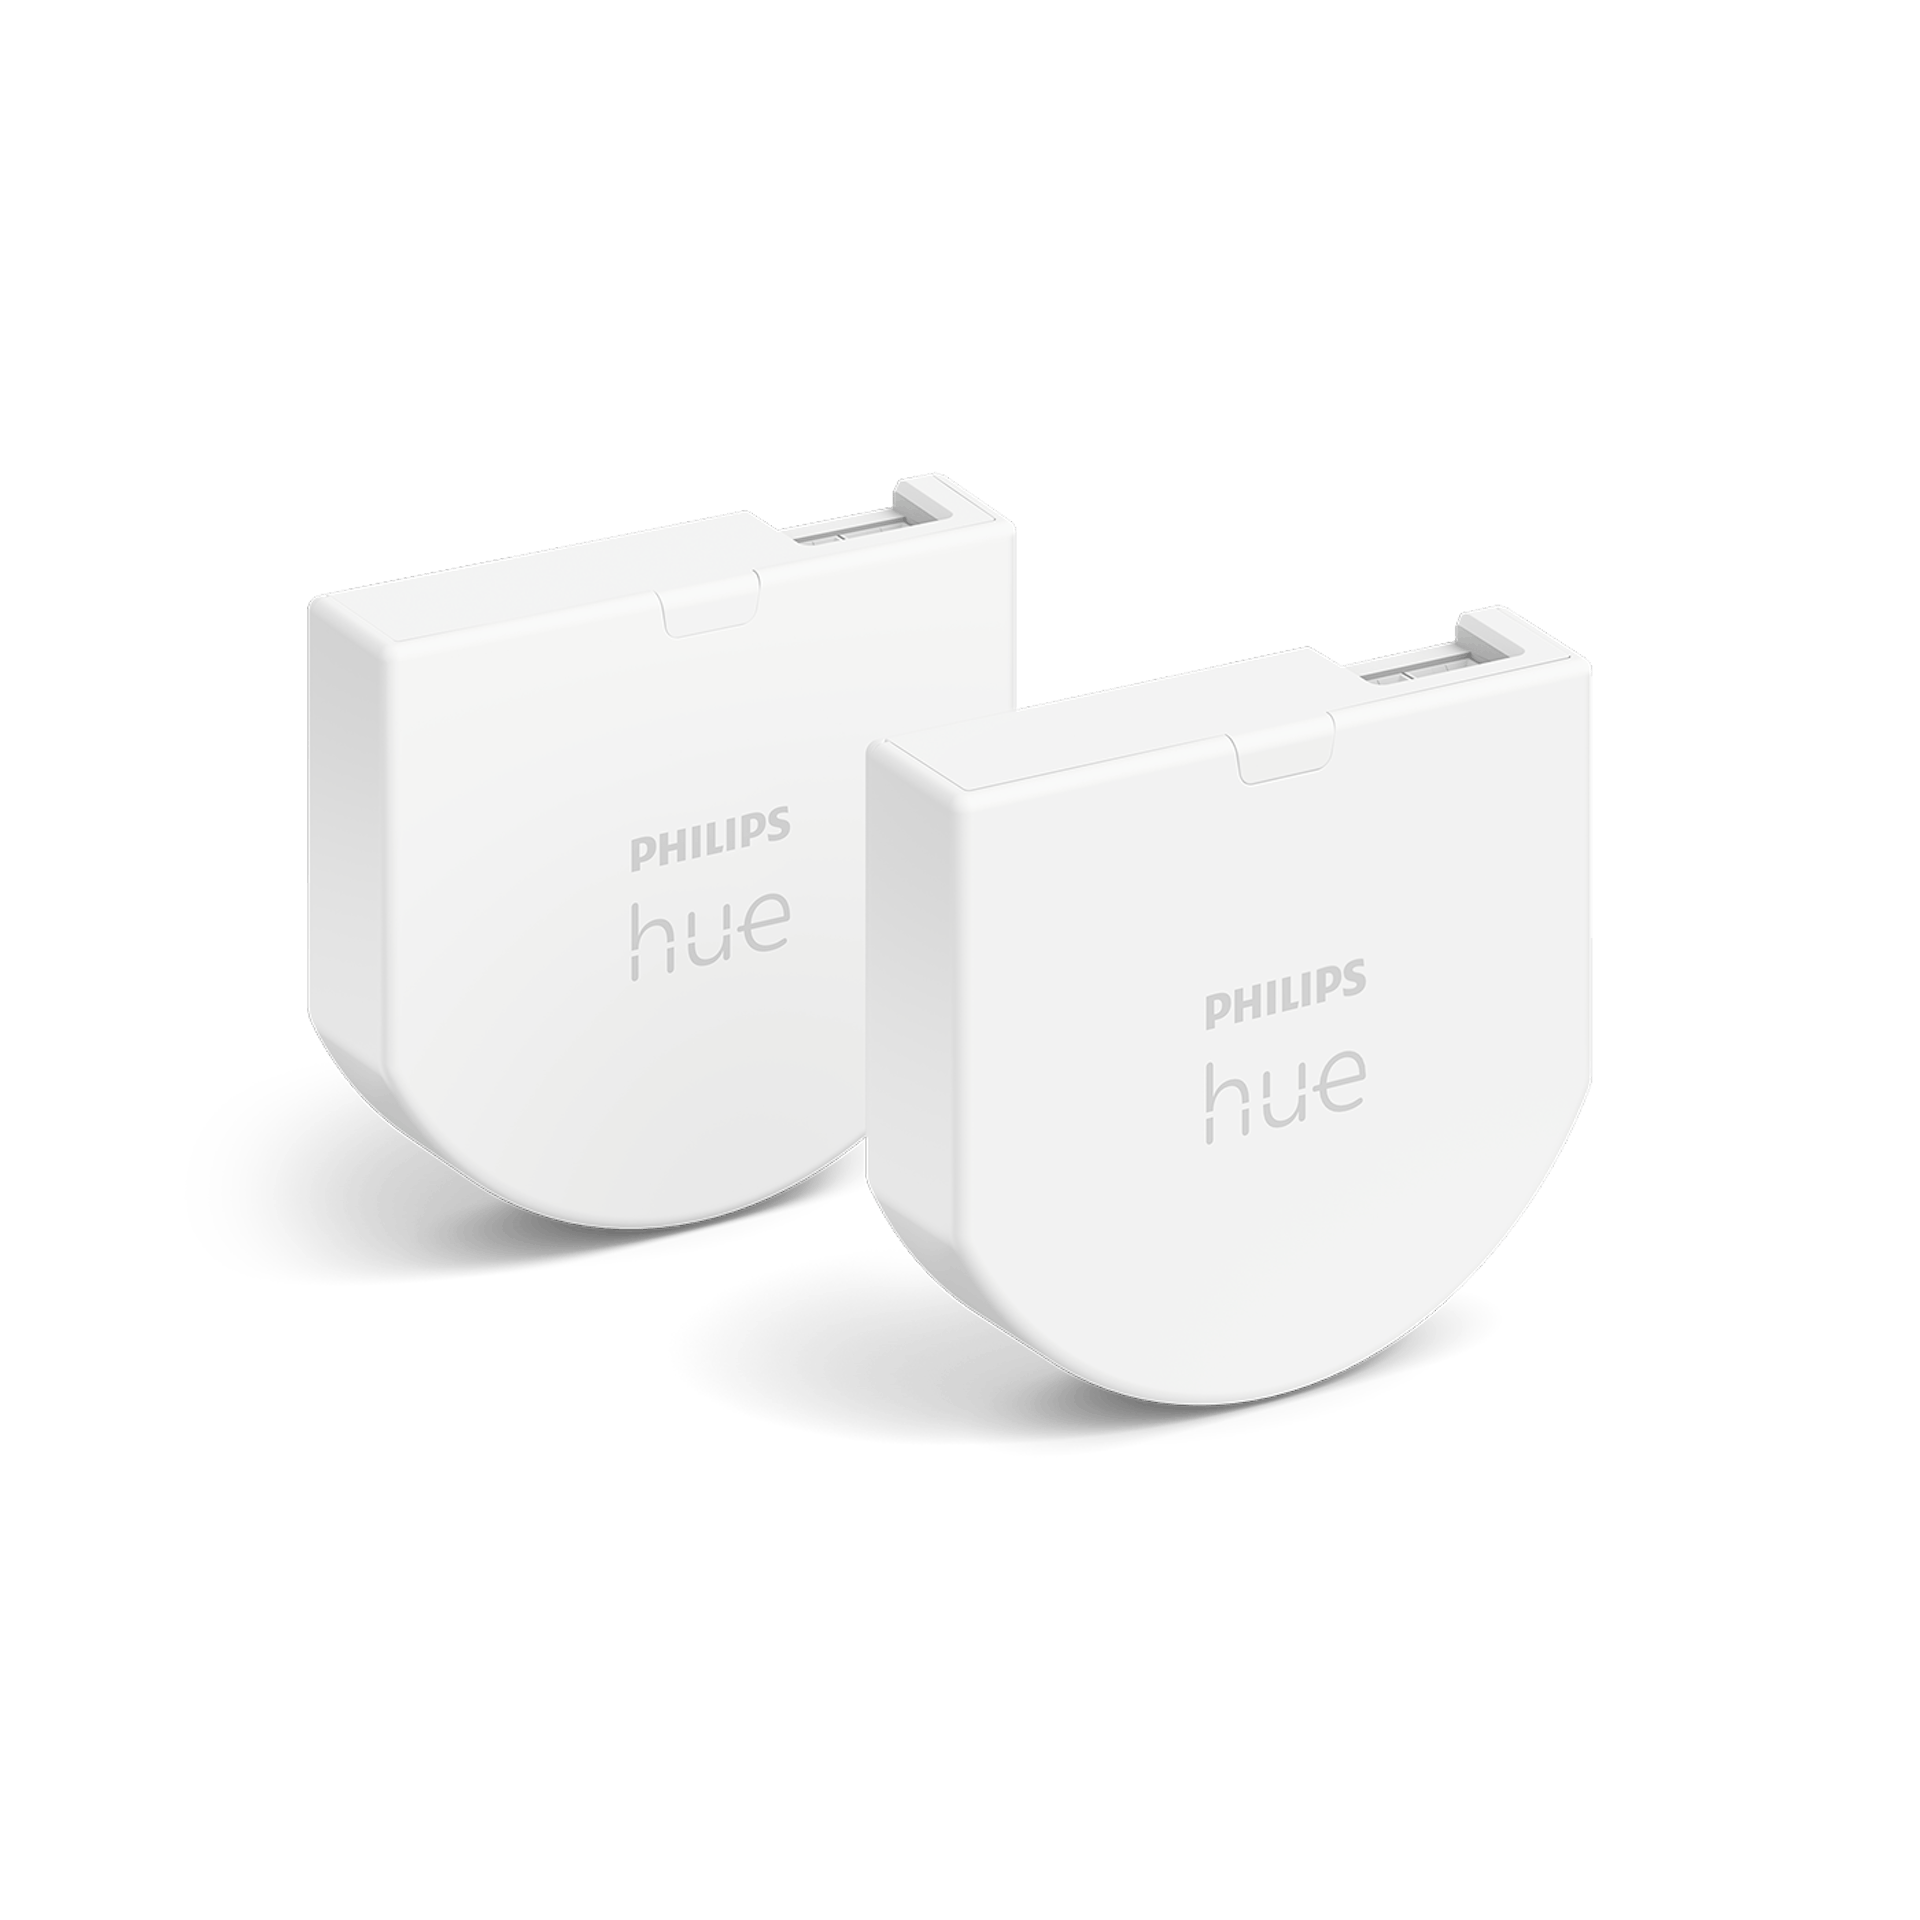 Philips Hue - Wall Switch Module (2-pack)